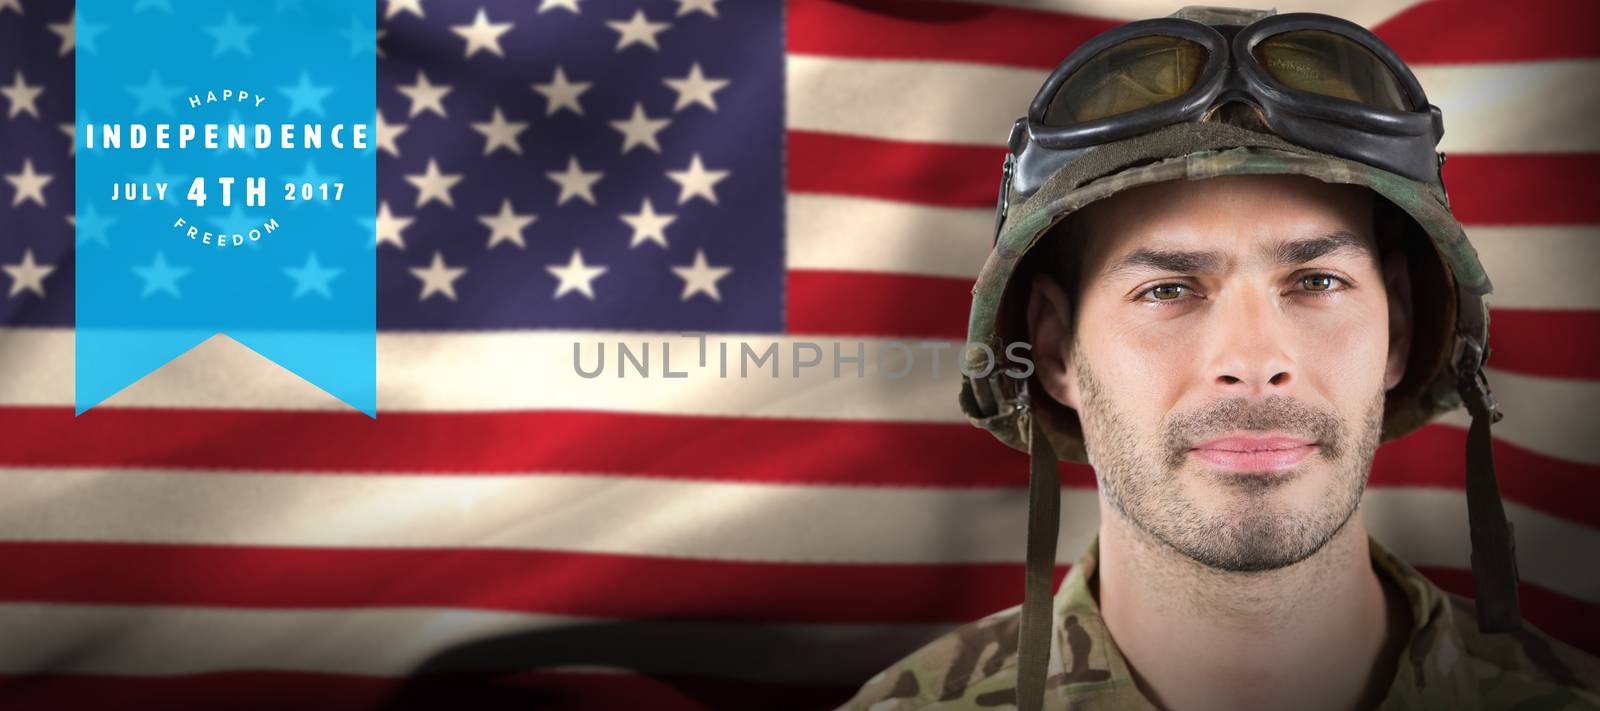 Close up of handsome soldier against computer graphic image of happy 4th of july text